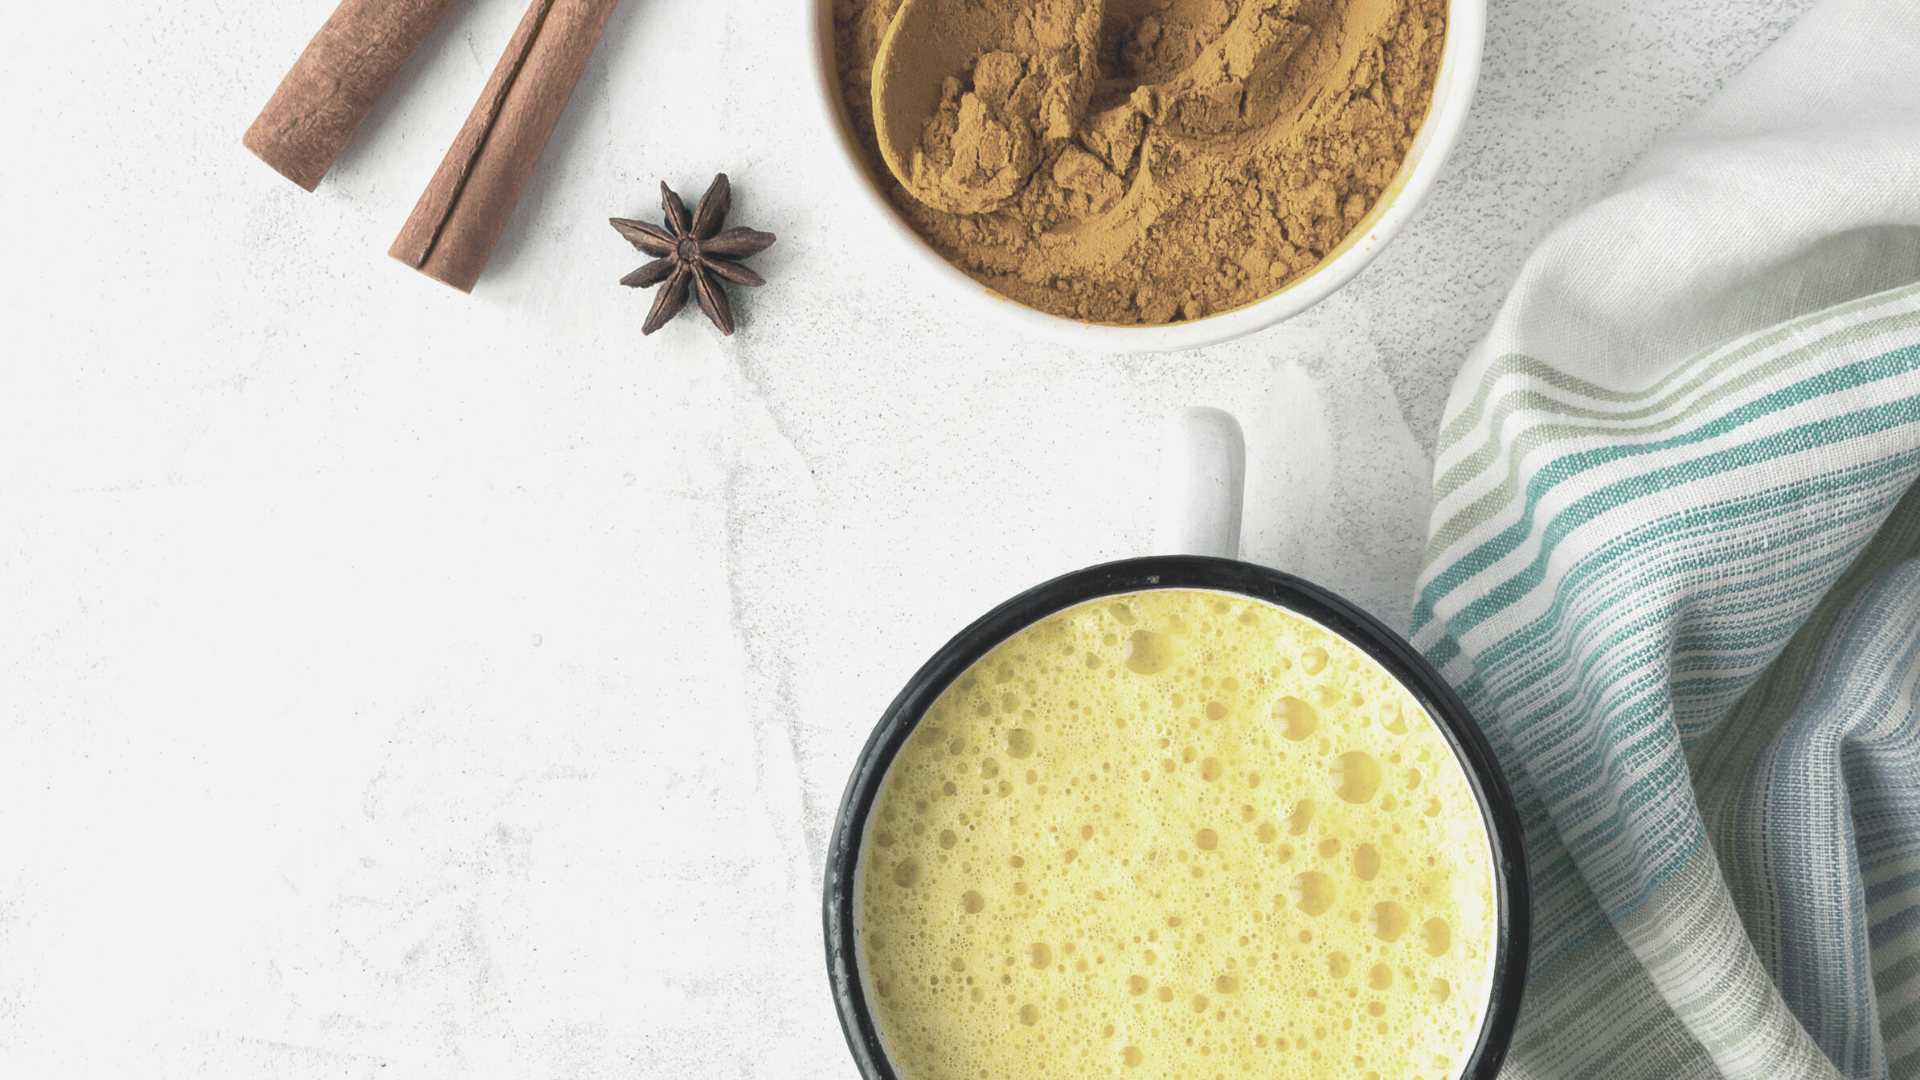 How to Make a Gut Healing Latte at Home